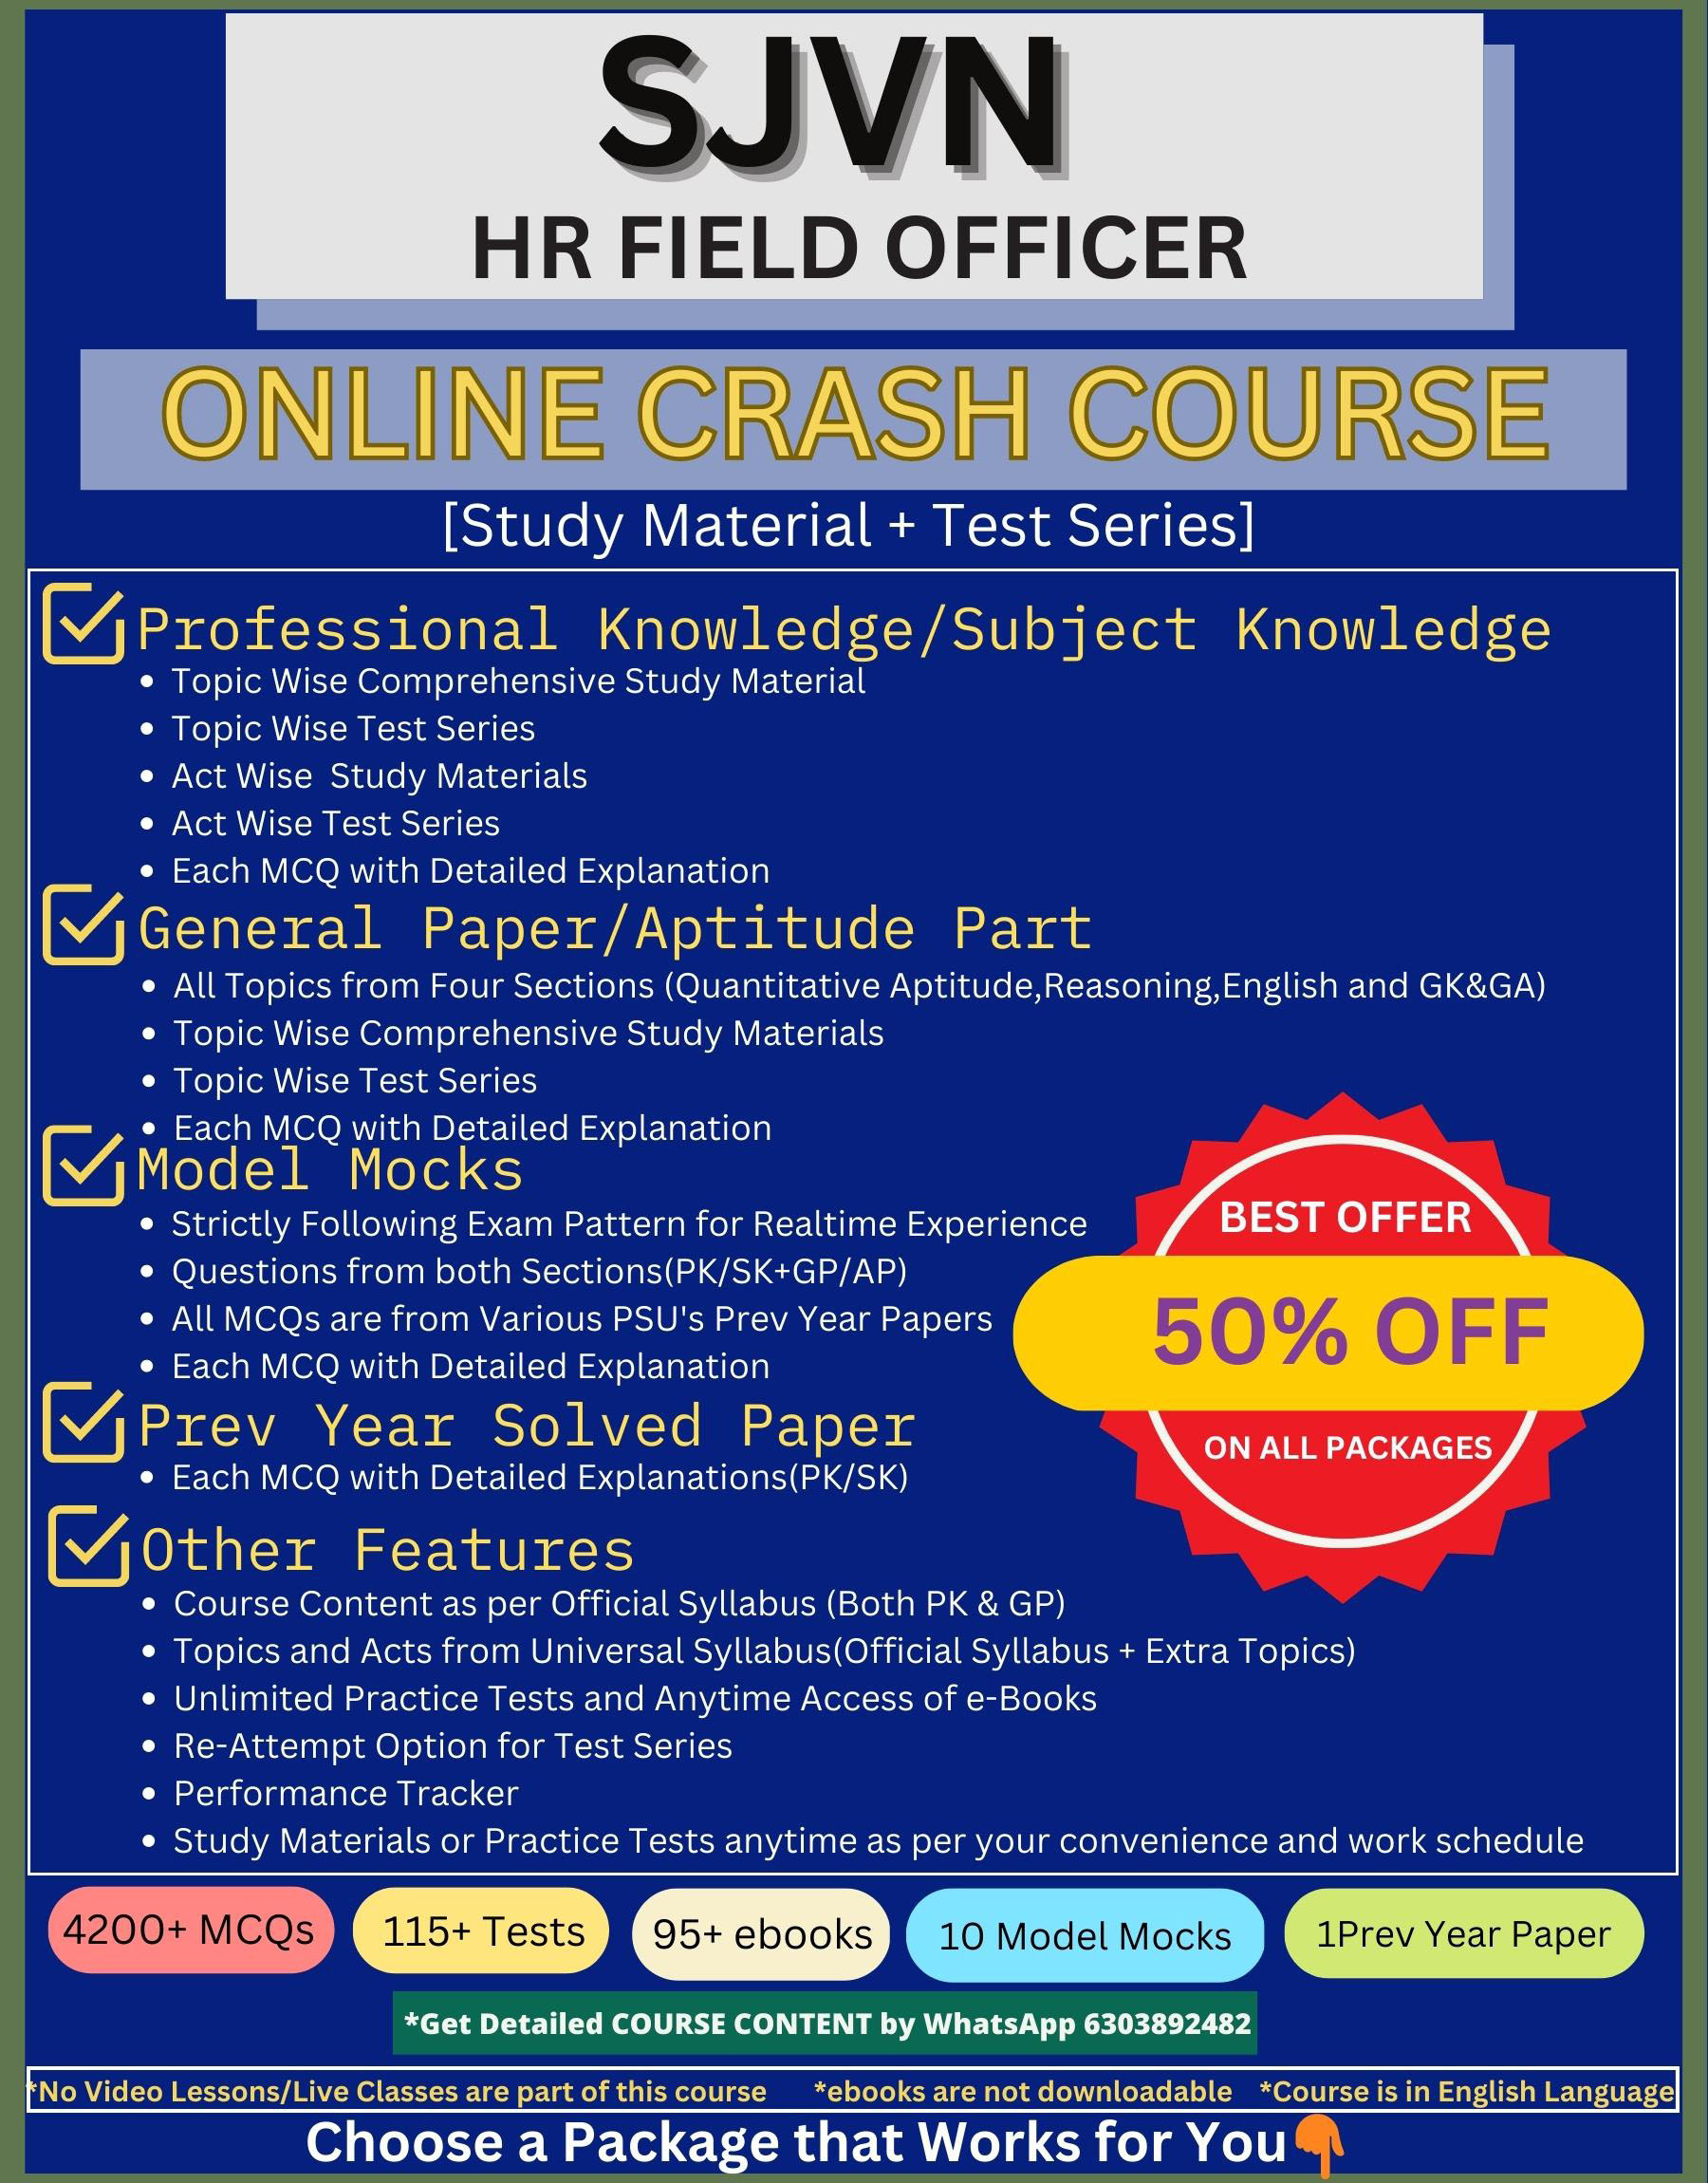 Online course with test series and study materials for SJVN HR Field Officer